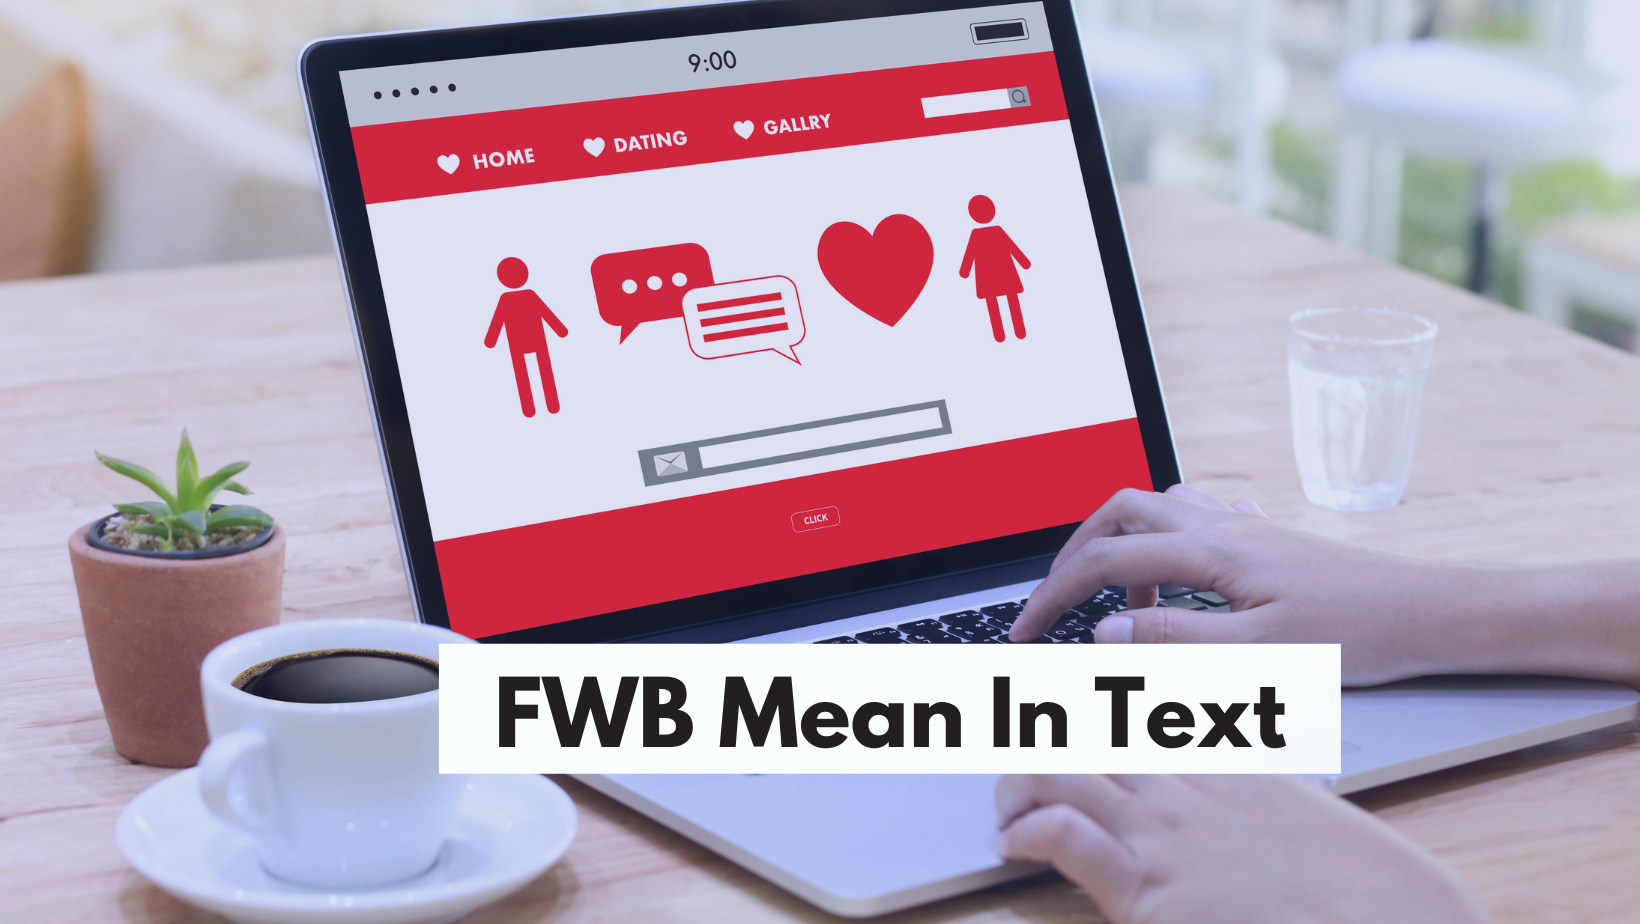 What Does Fwb Stand For In Texting